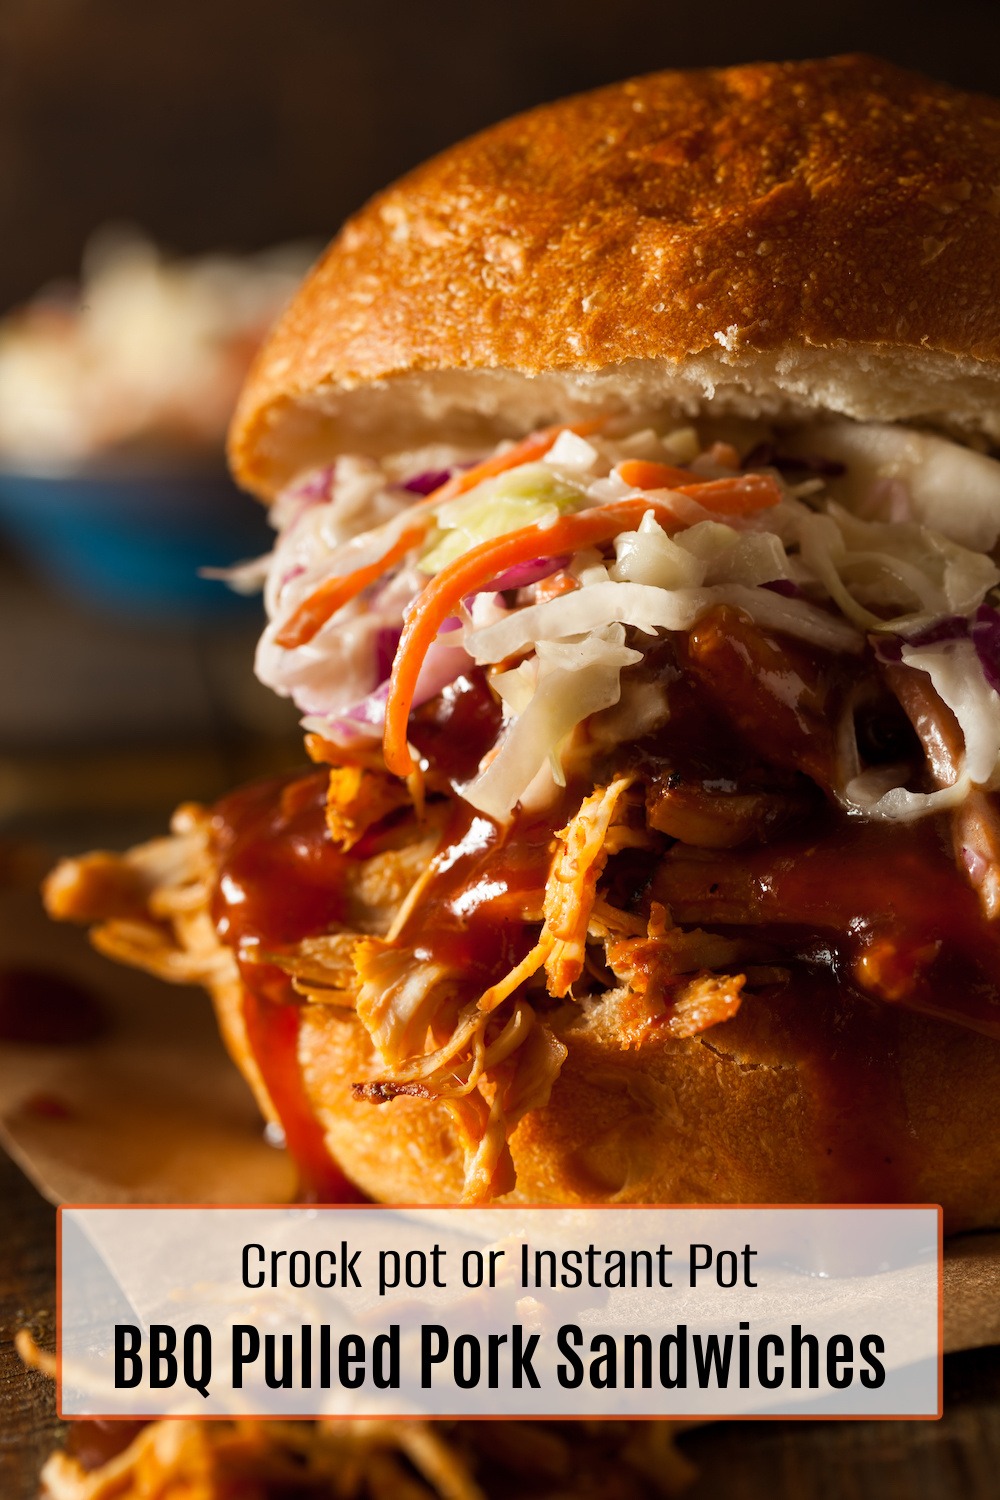 A close up of Crock Pot or Instant Pot BBQ Pulled Pork Sandwiches with coleslaw on wooden board